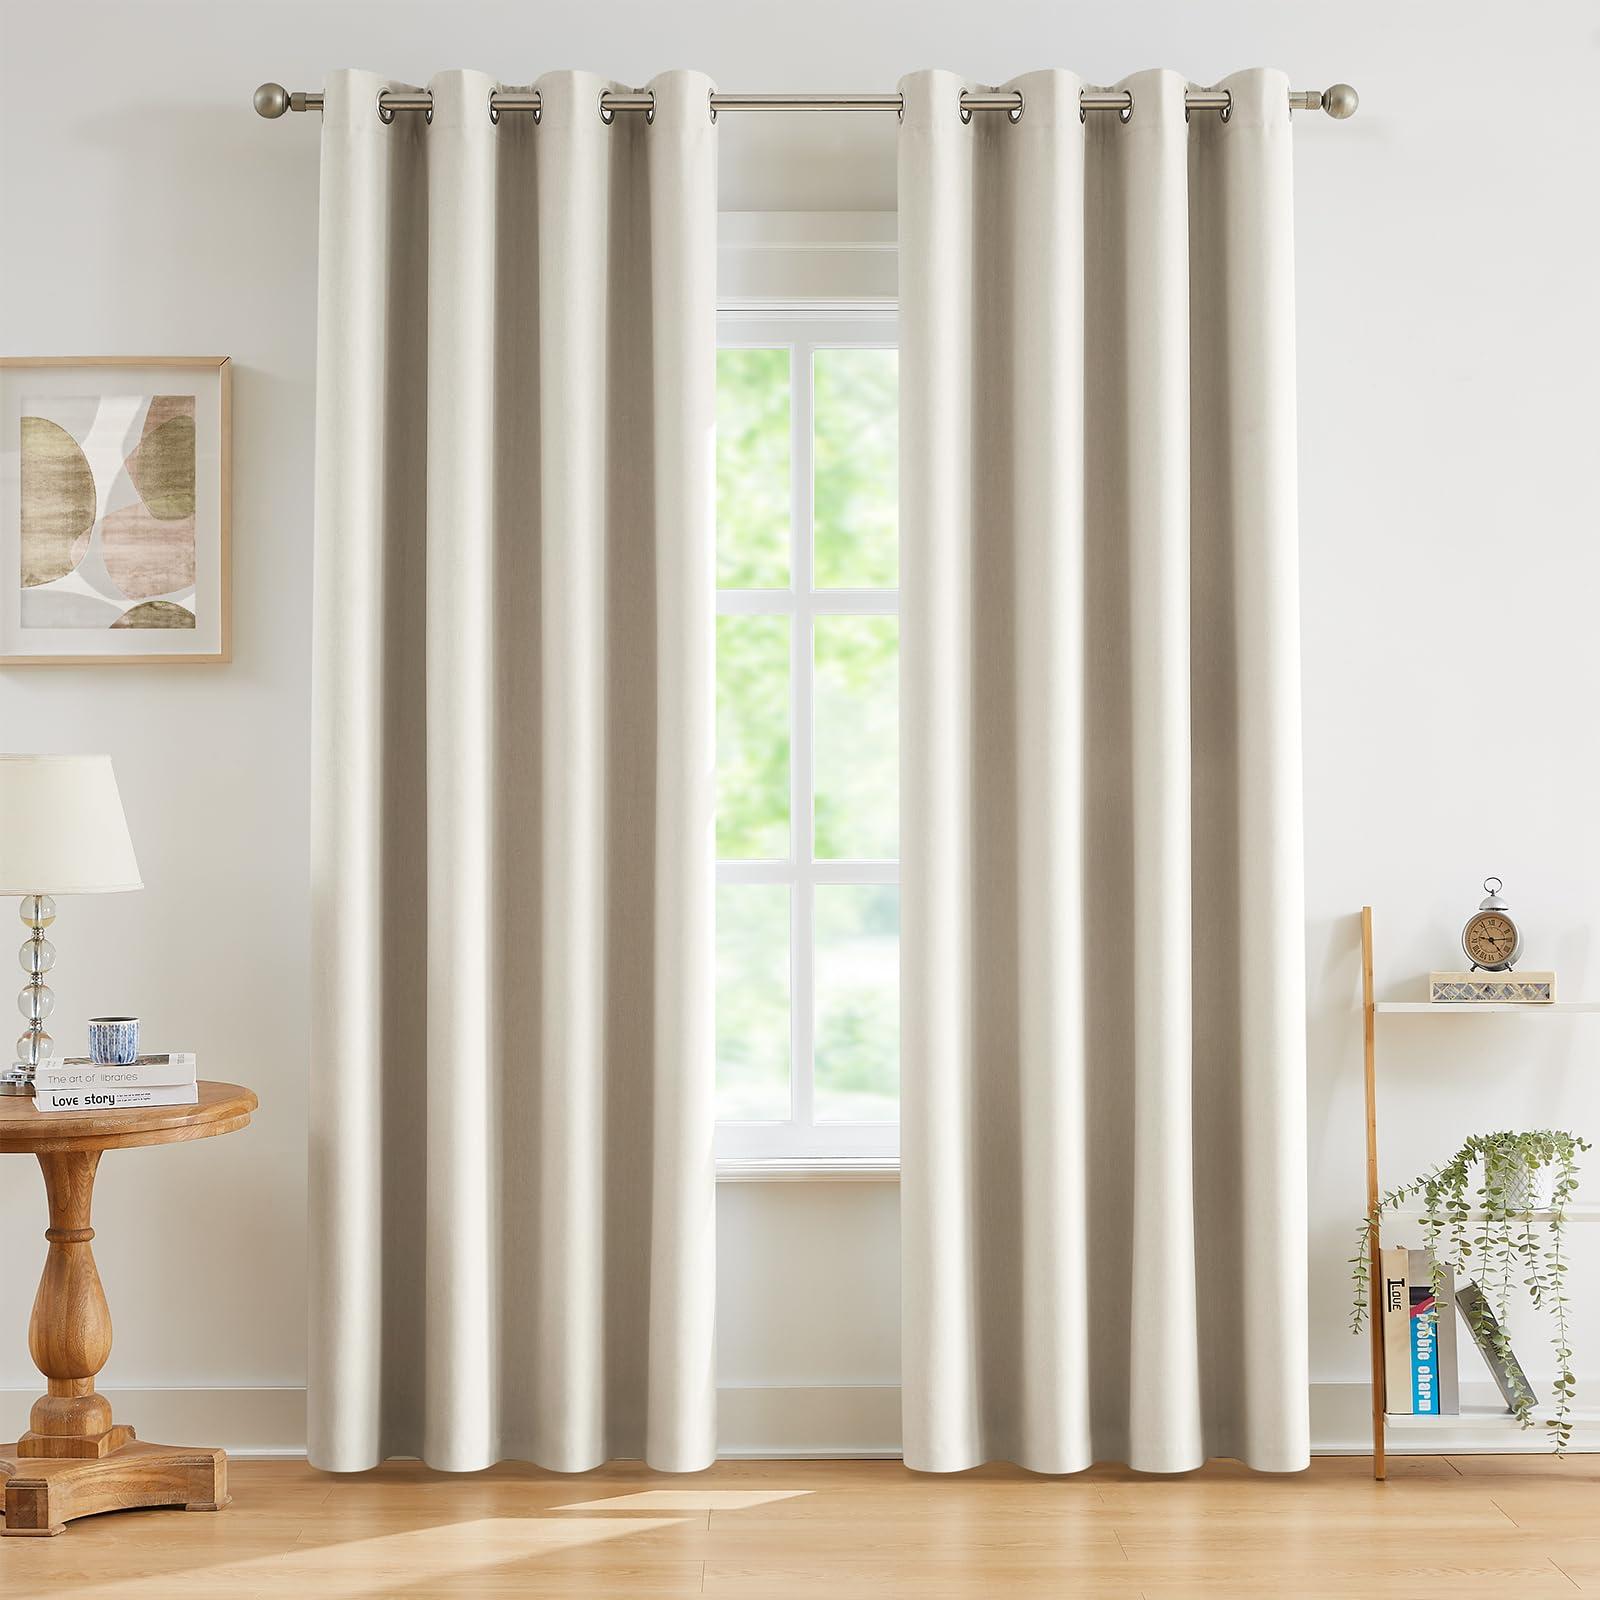 WEST LAKE Tan Blackout Curtain Panels 90 Inch Three Layers Thermal Insulated Noise Reduction Window Treatment Set Grommets Top 2 Panels for Living Room Bedroom 52"x90"x2 0